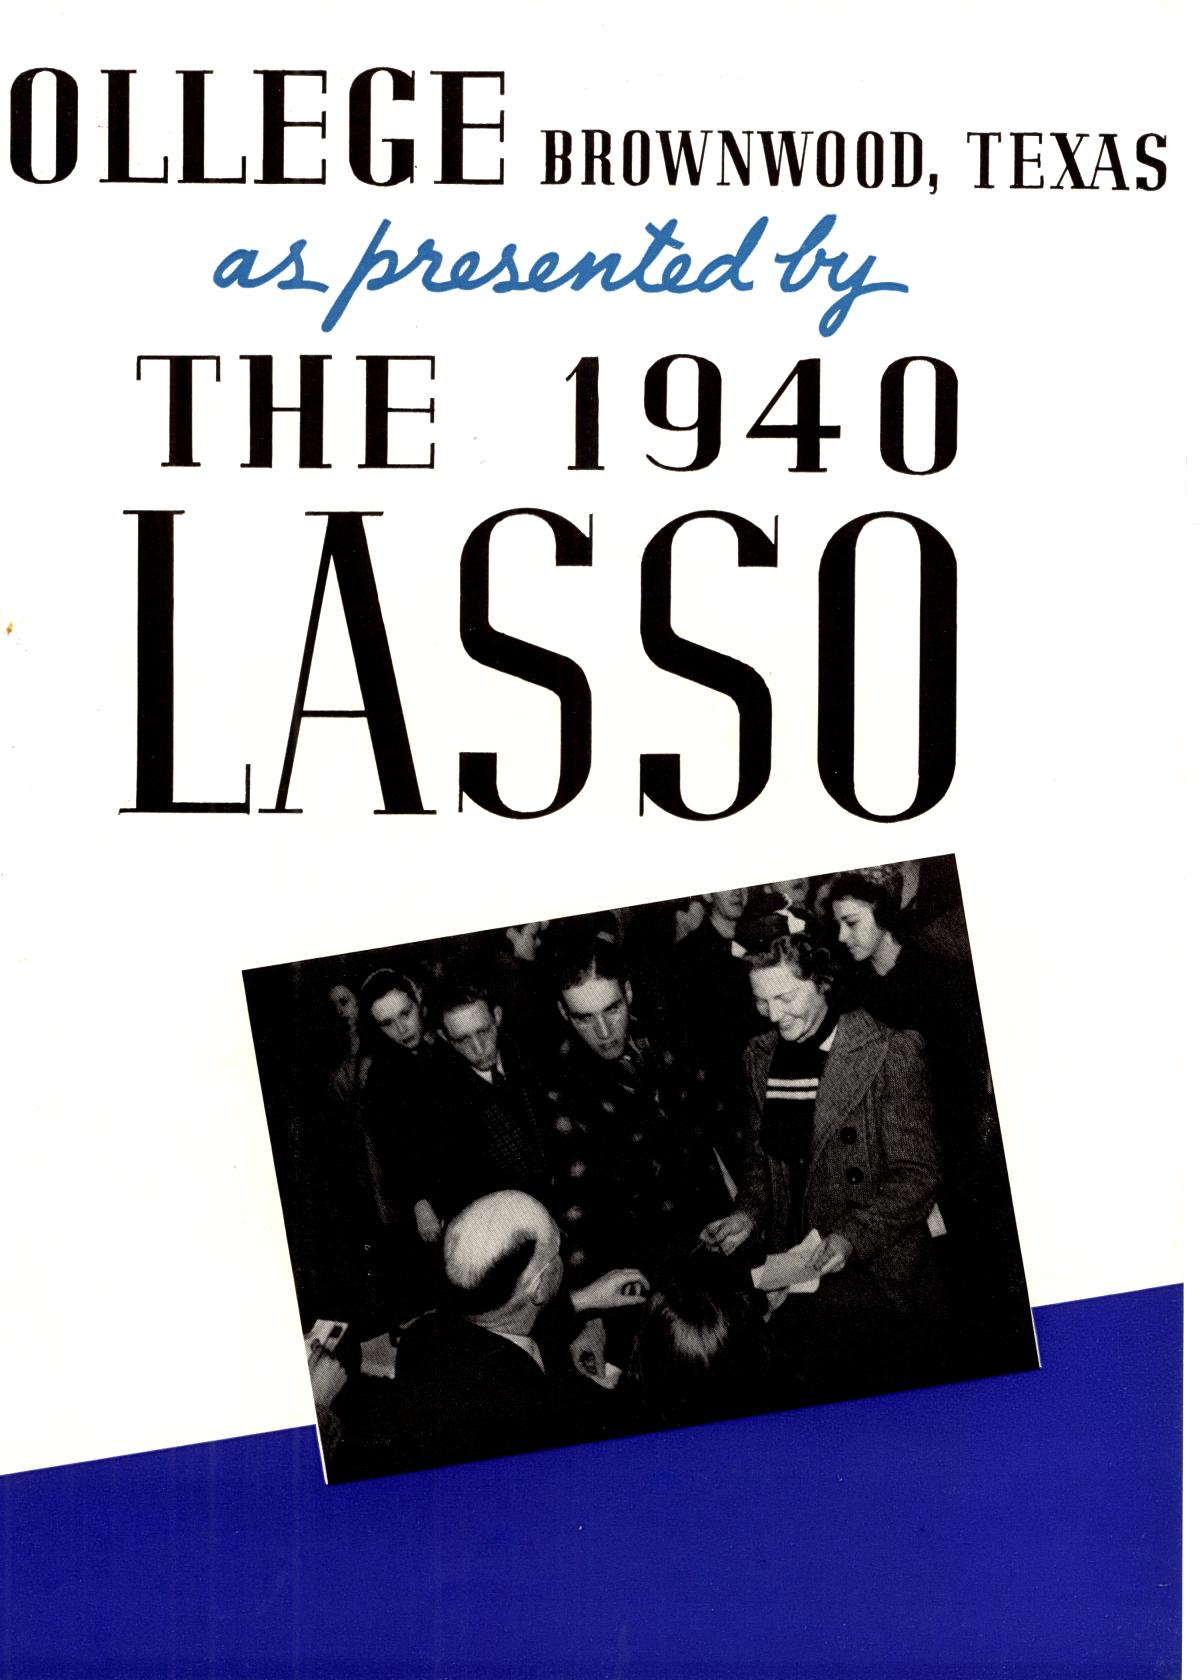 The Lasso, Yearbook of Howard Payne College, 1940
                                                
                                                    12
                                                